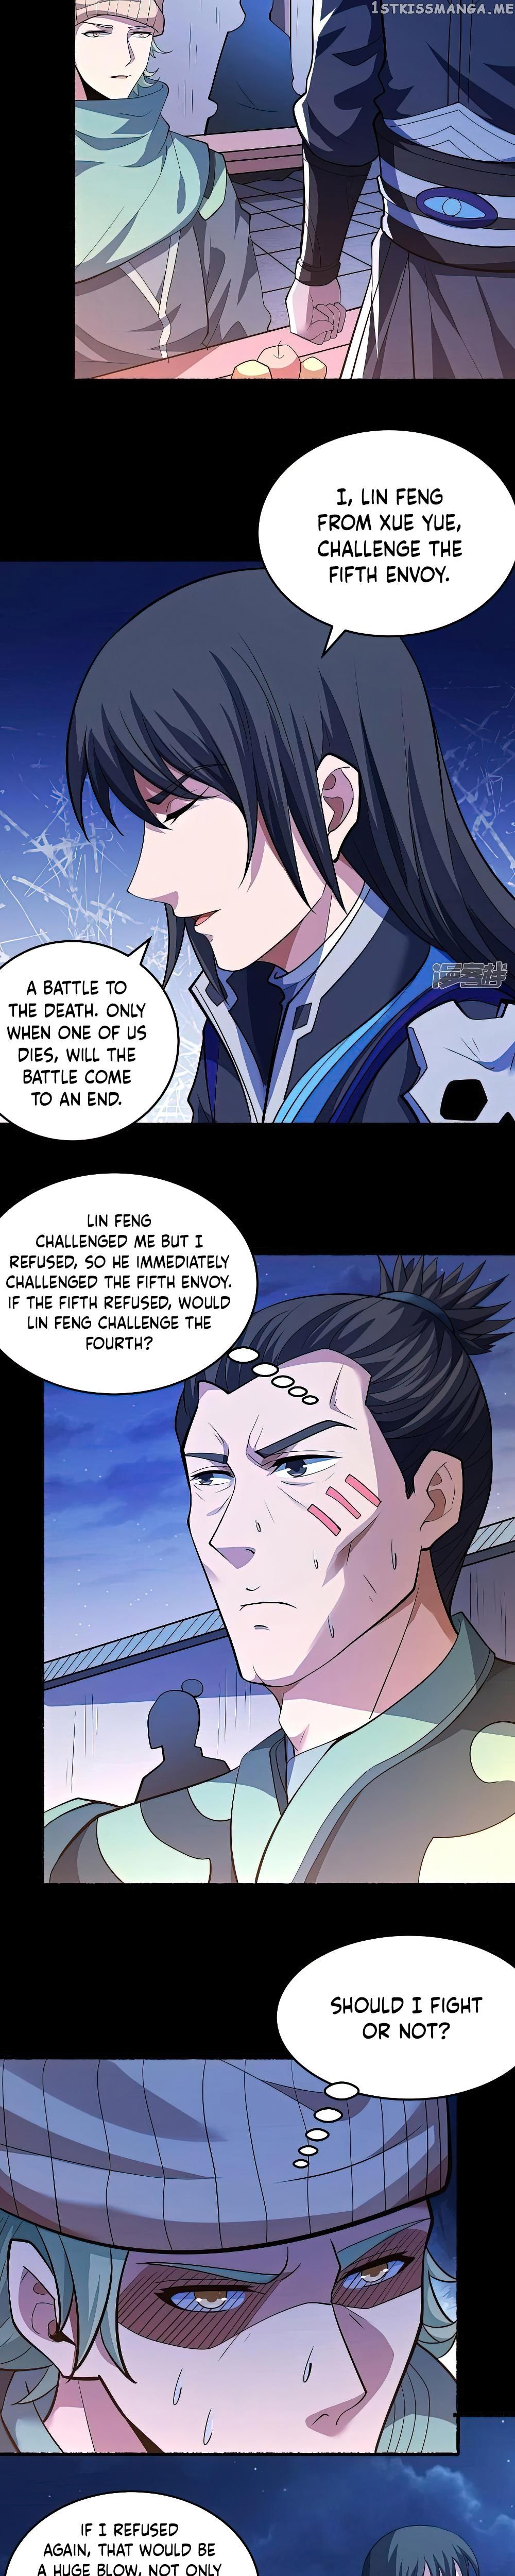 God of Martial Arts Chapter 610 - Page 8